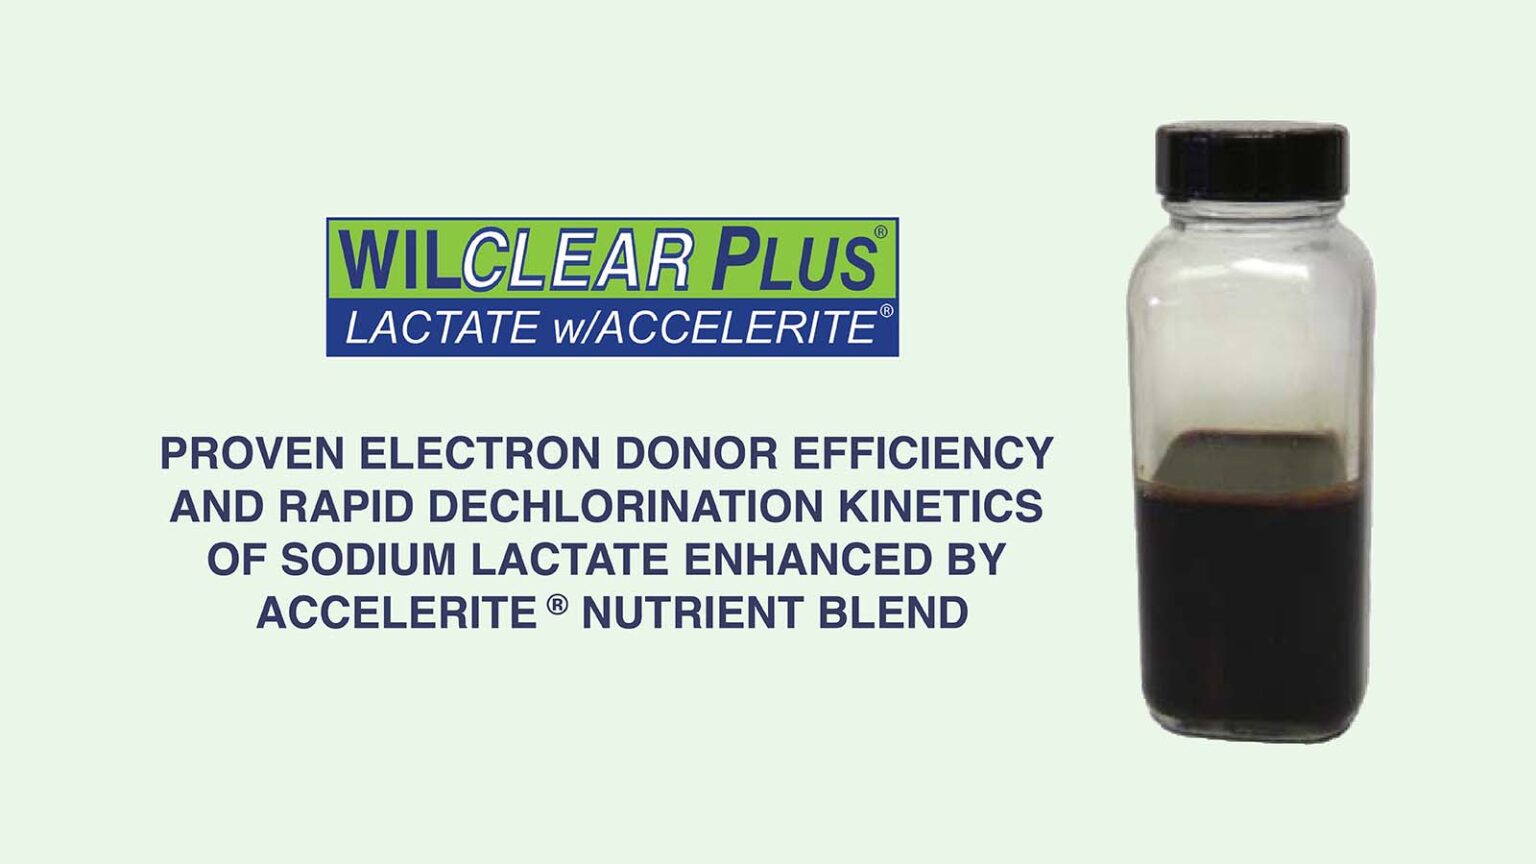 JRW Bioremediation, LLC - Wilclear Plus® - Our Products